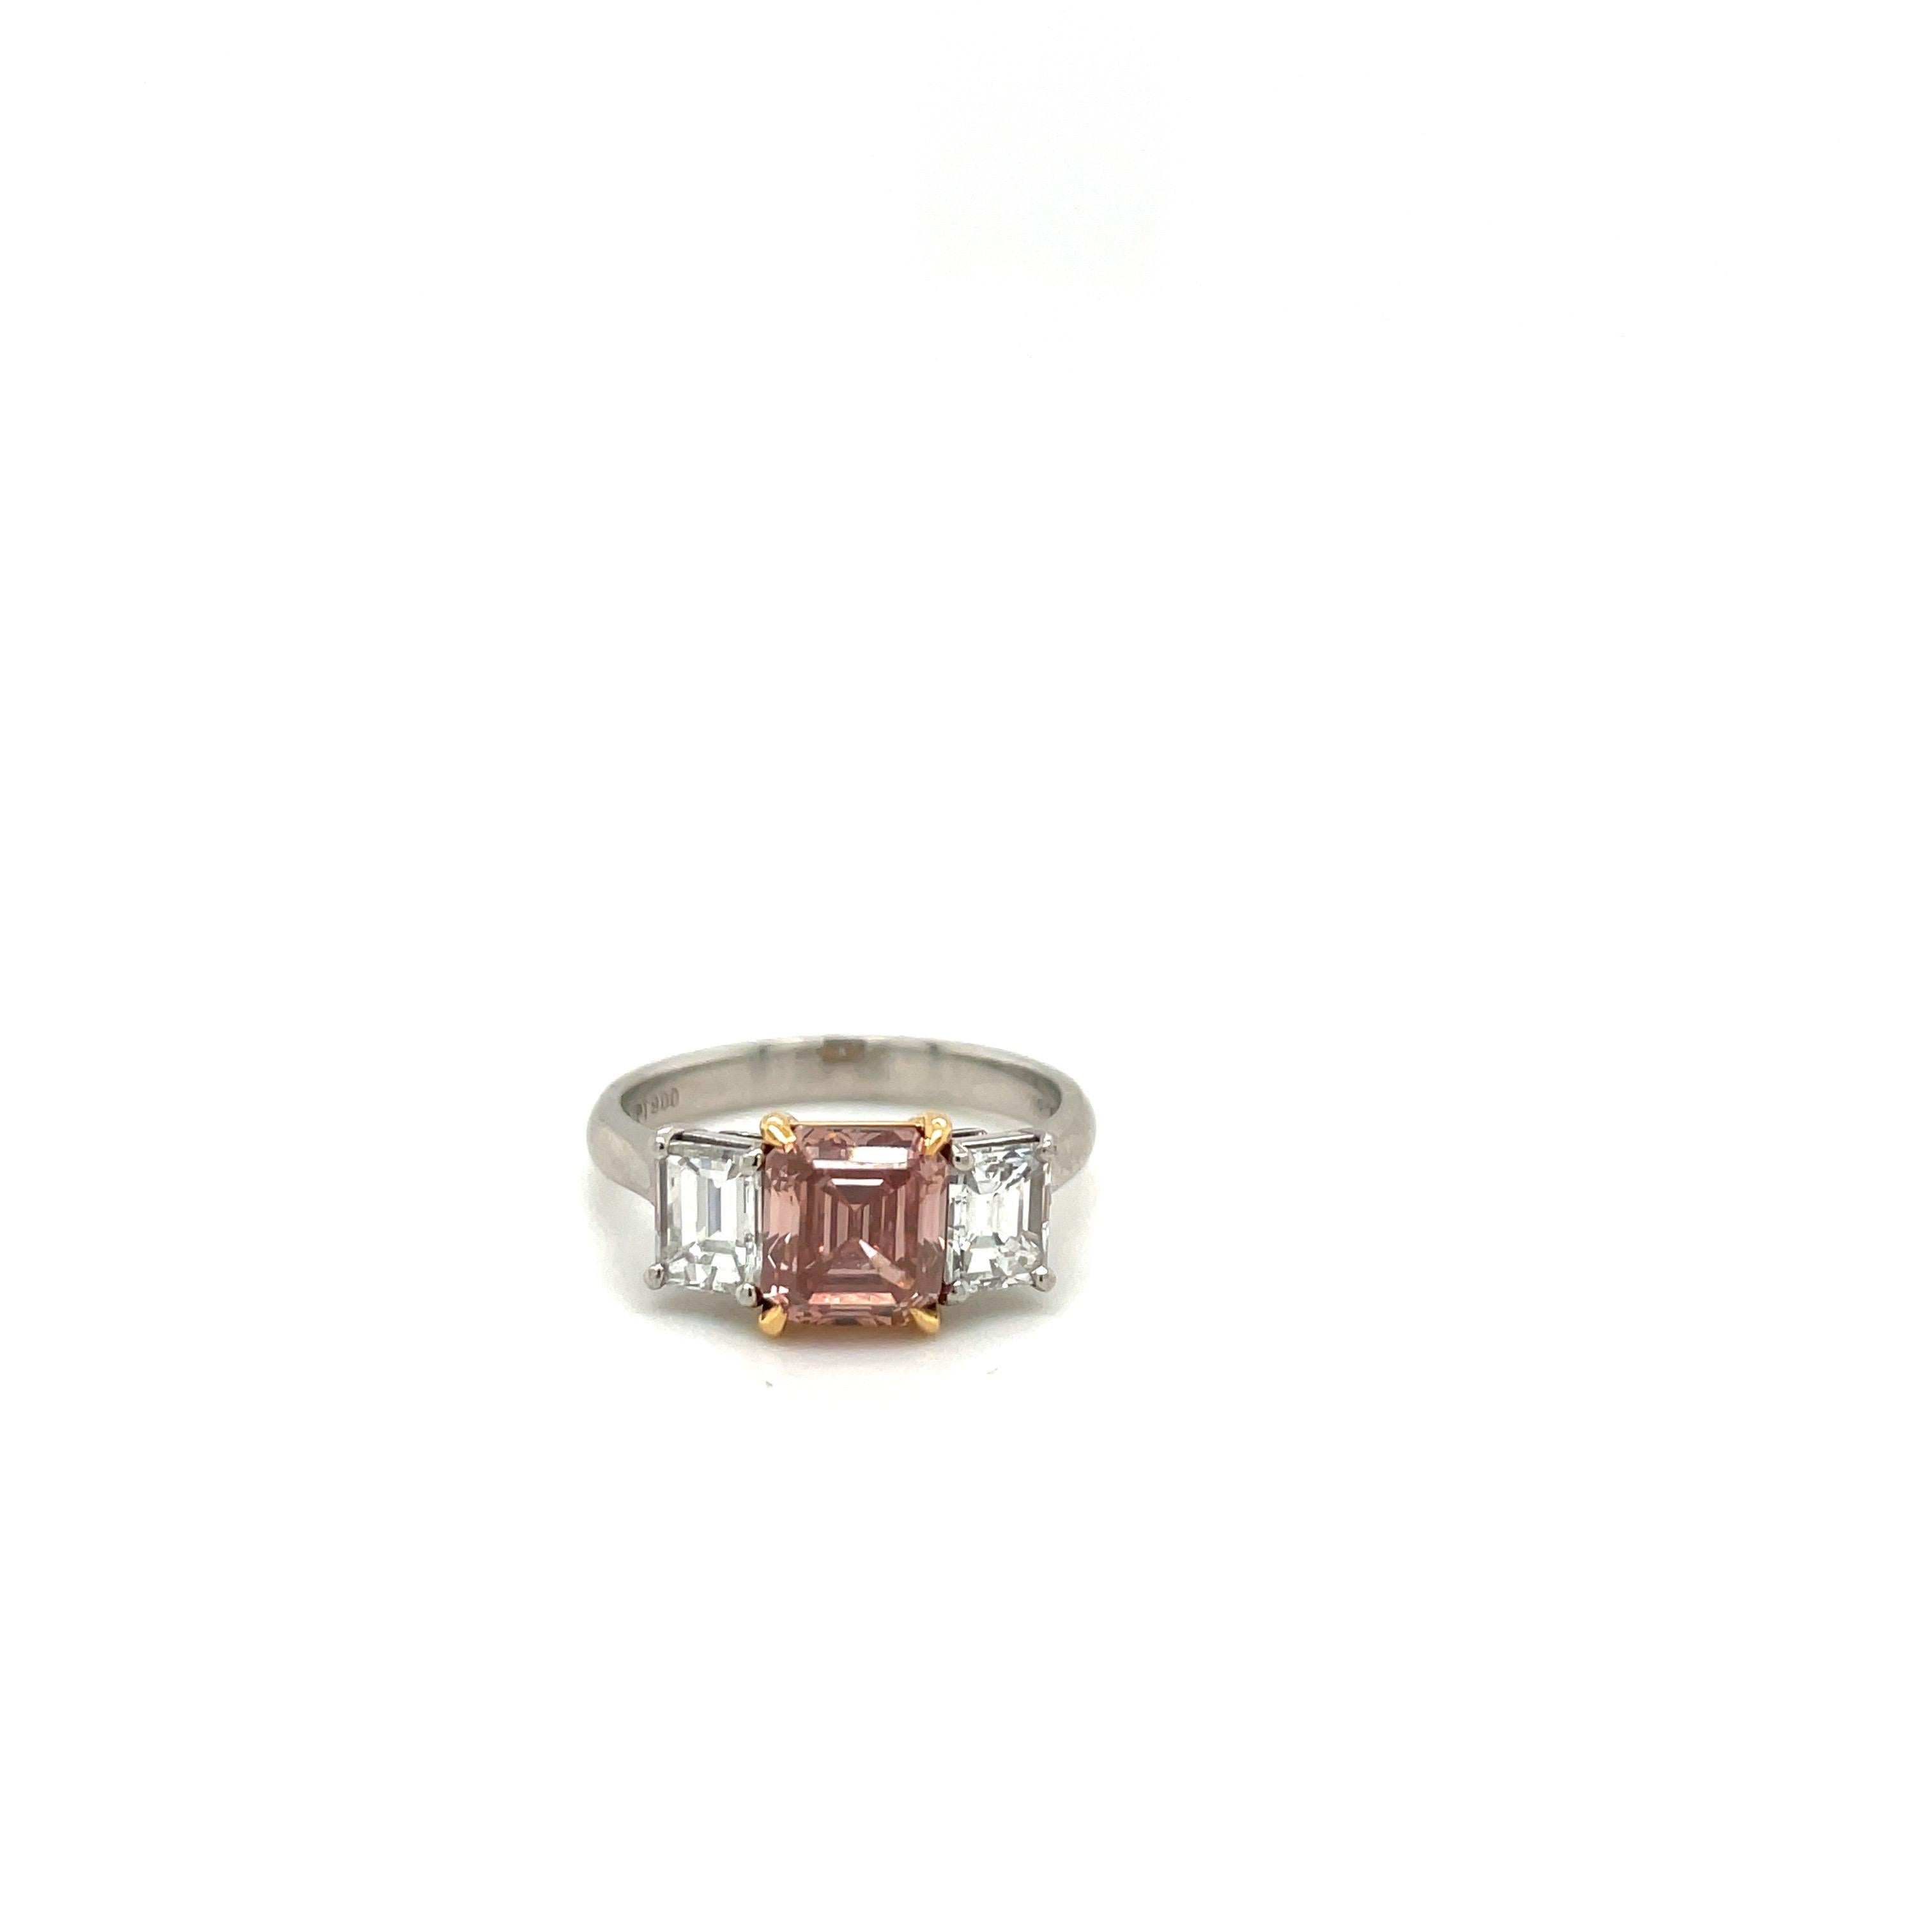 1.75ct GIA Natural Fancy Pink Emerald Cut Diamond Ring In New Condition For Sale In New York, NY